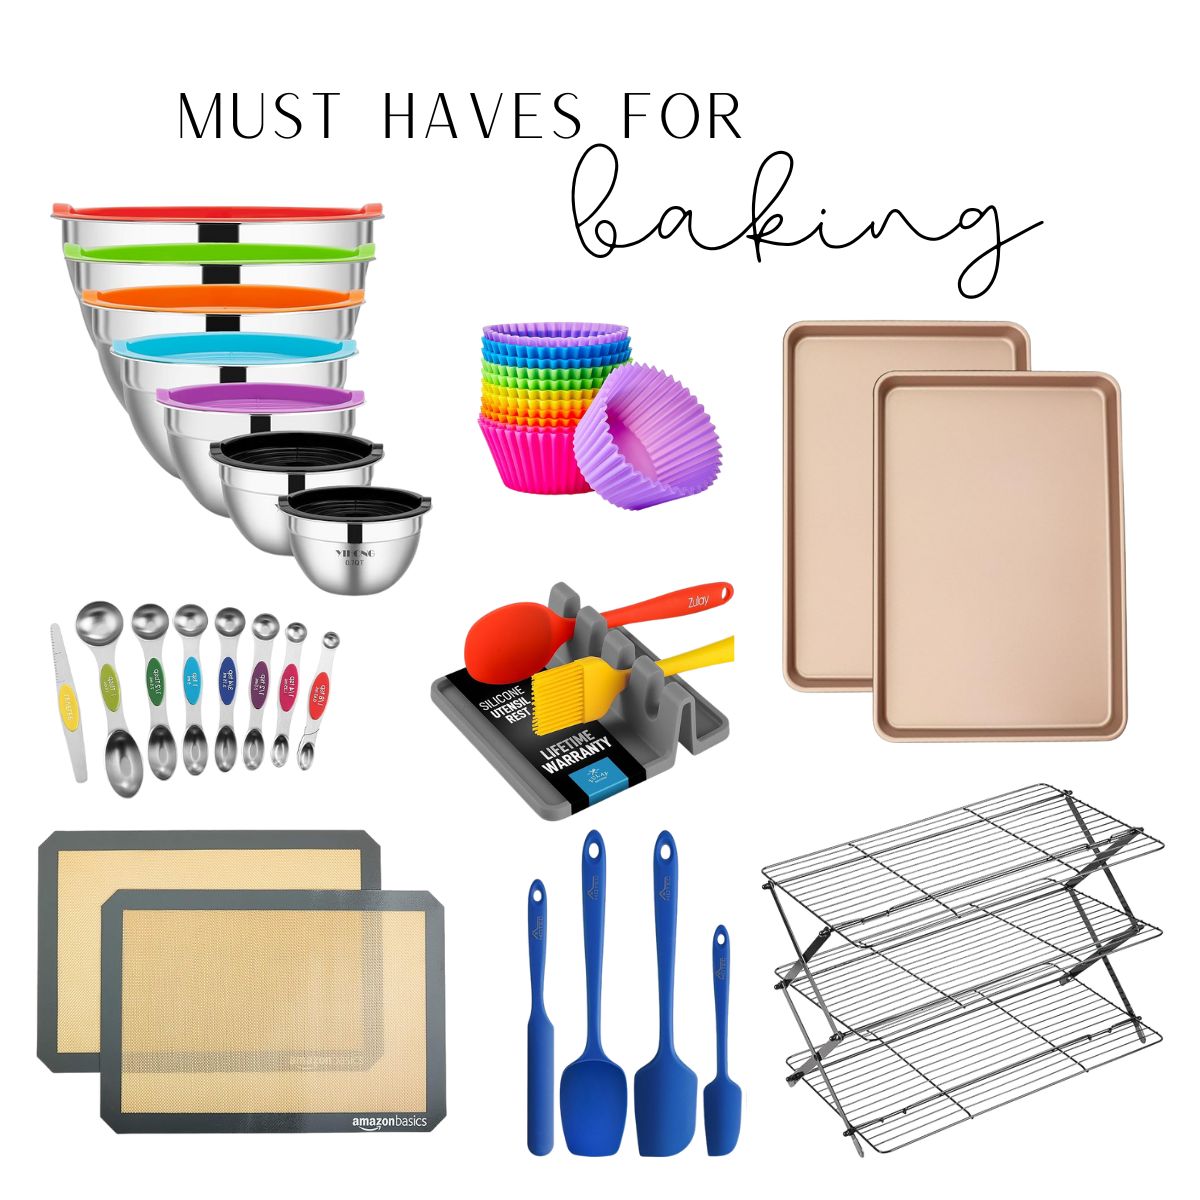 Baking must haves | Amazon (US)